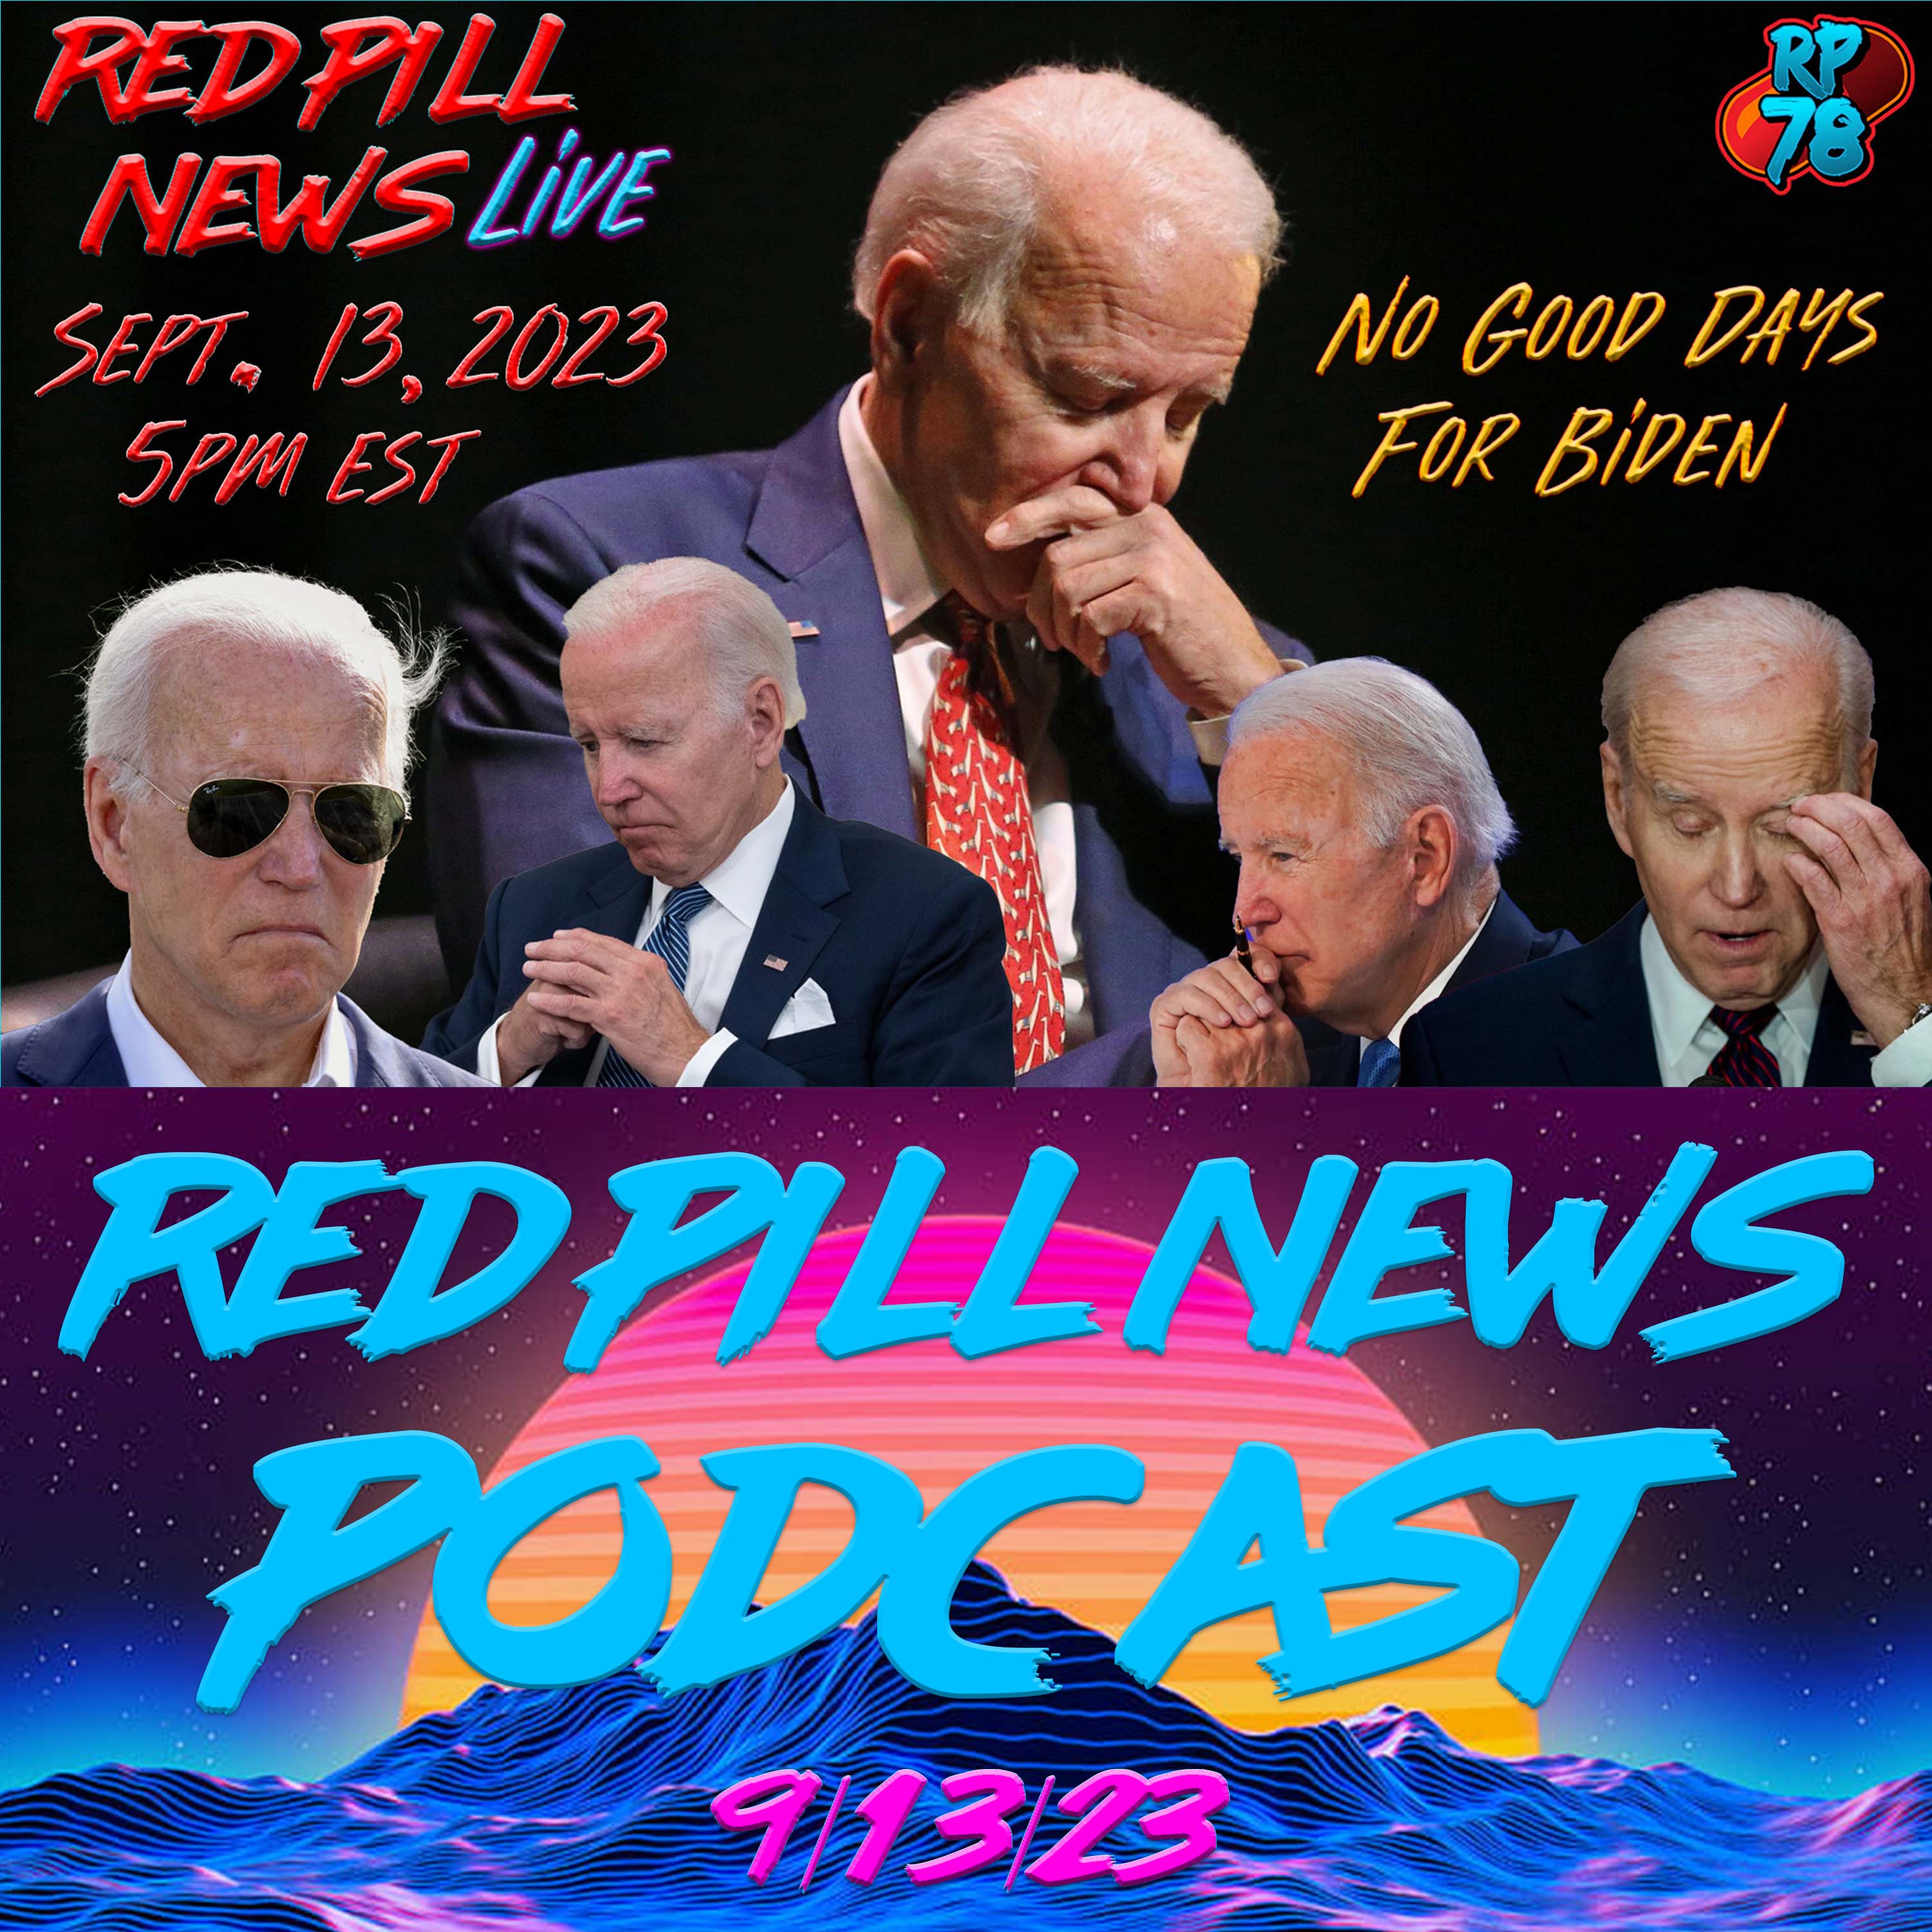 Getting Worse For Biden Day By Day - Justice Is Coming on Red Pill News Live